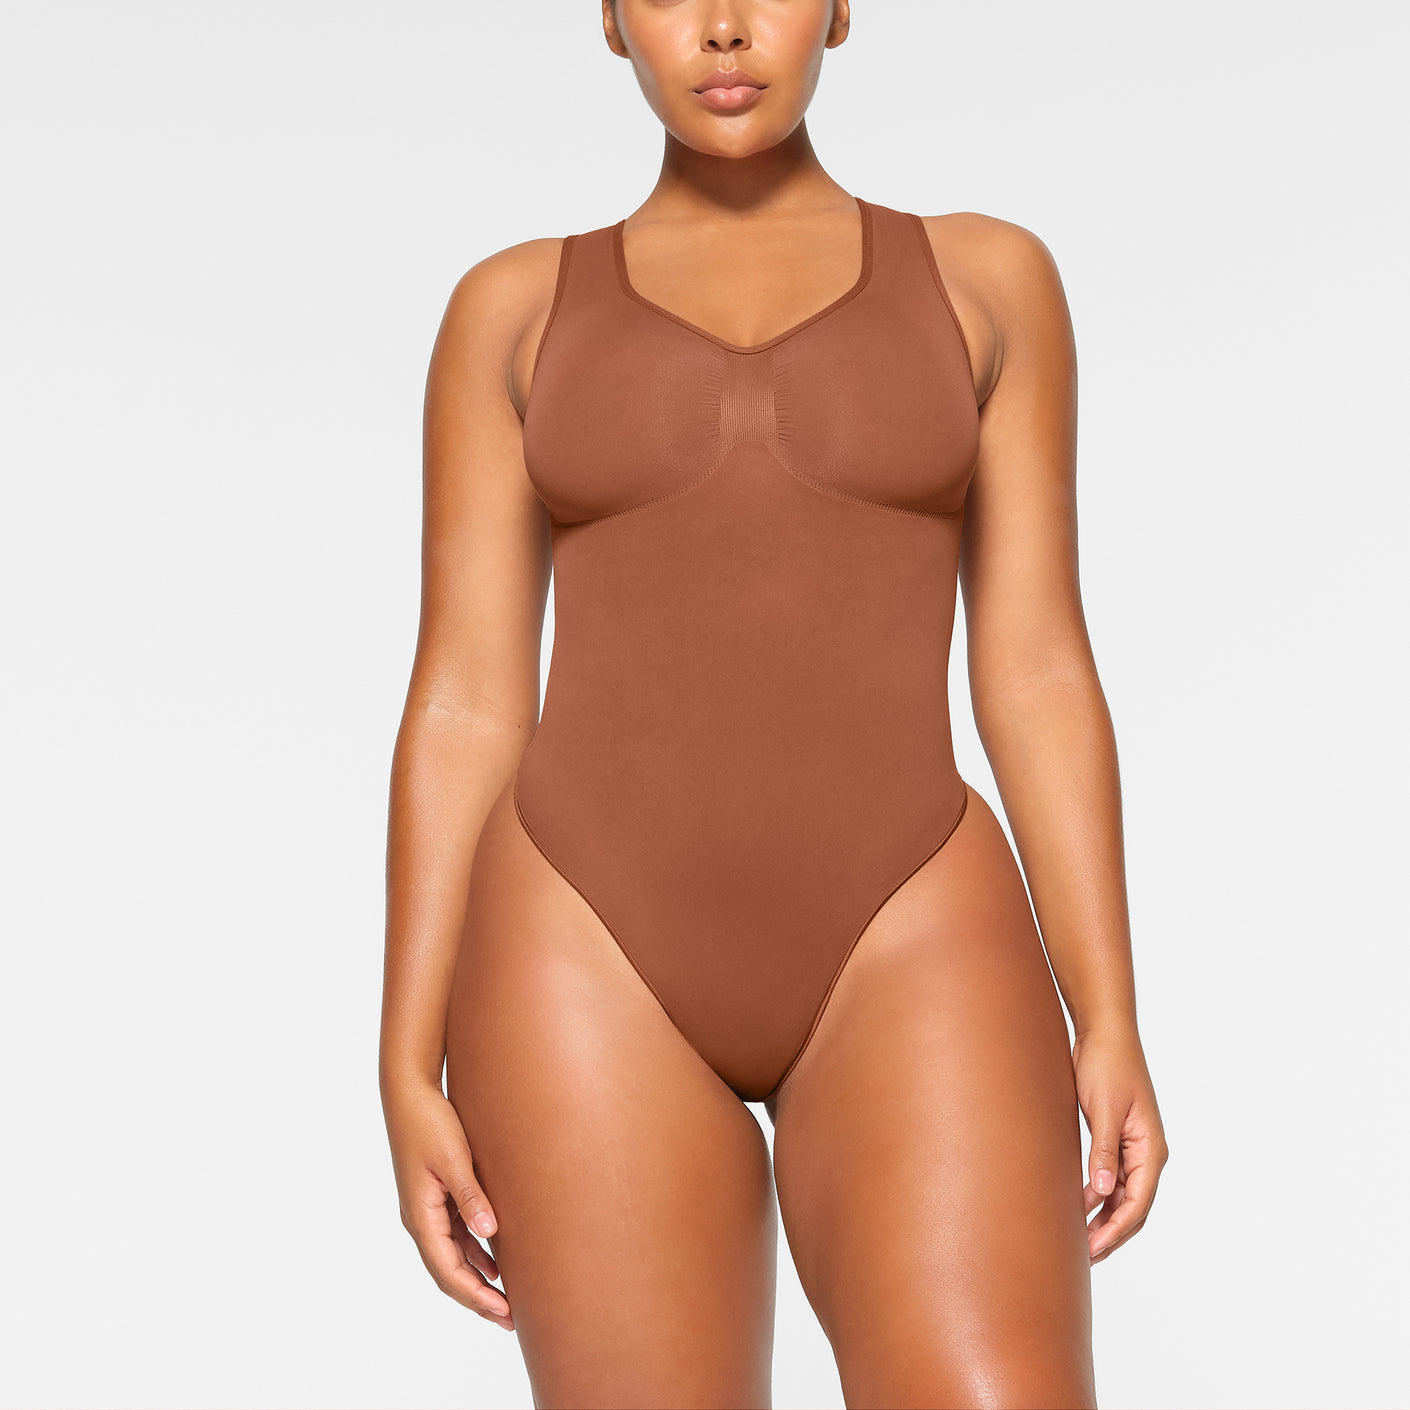 SKIMS SEAMLESS SCULPT THONG BODYSUIT Size undefined - $68 - From Rachel